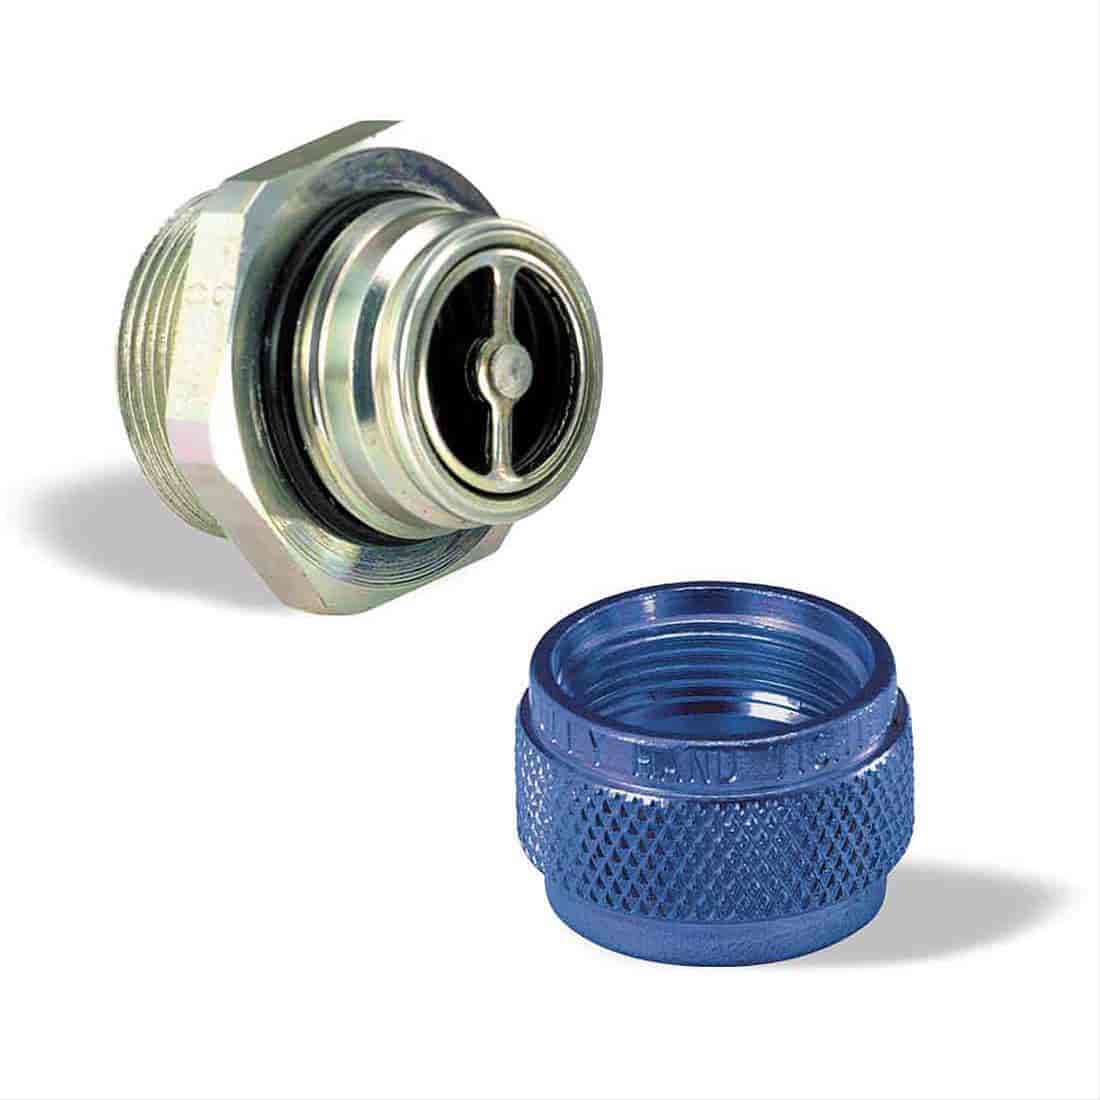 Male Half M20 x 1.5 Thread Size 1.54in.x.96in. 1-1/4in. Hex Size - Quick-Drain Oil Pan Coupling